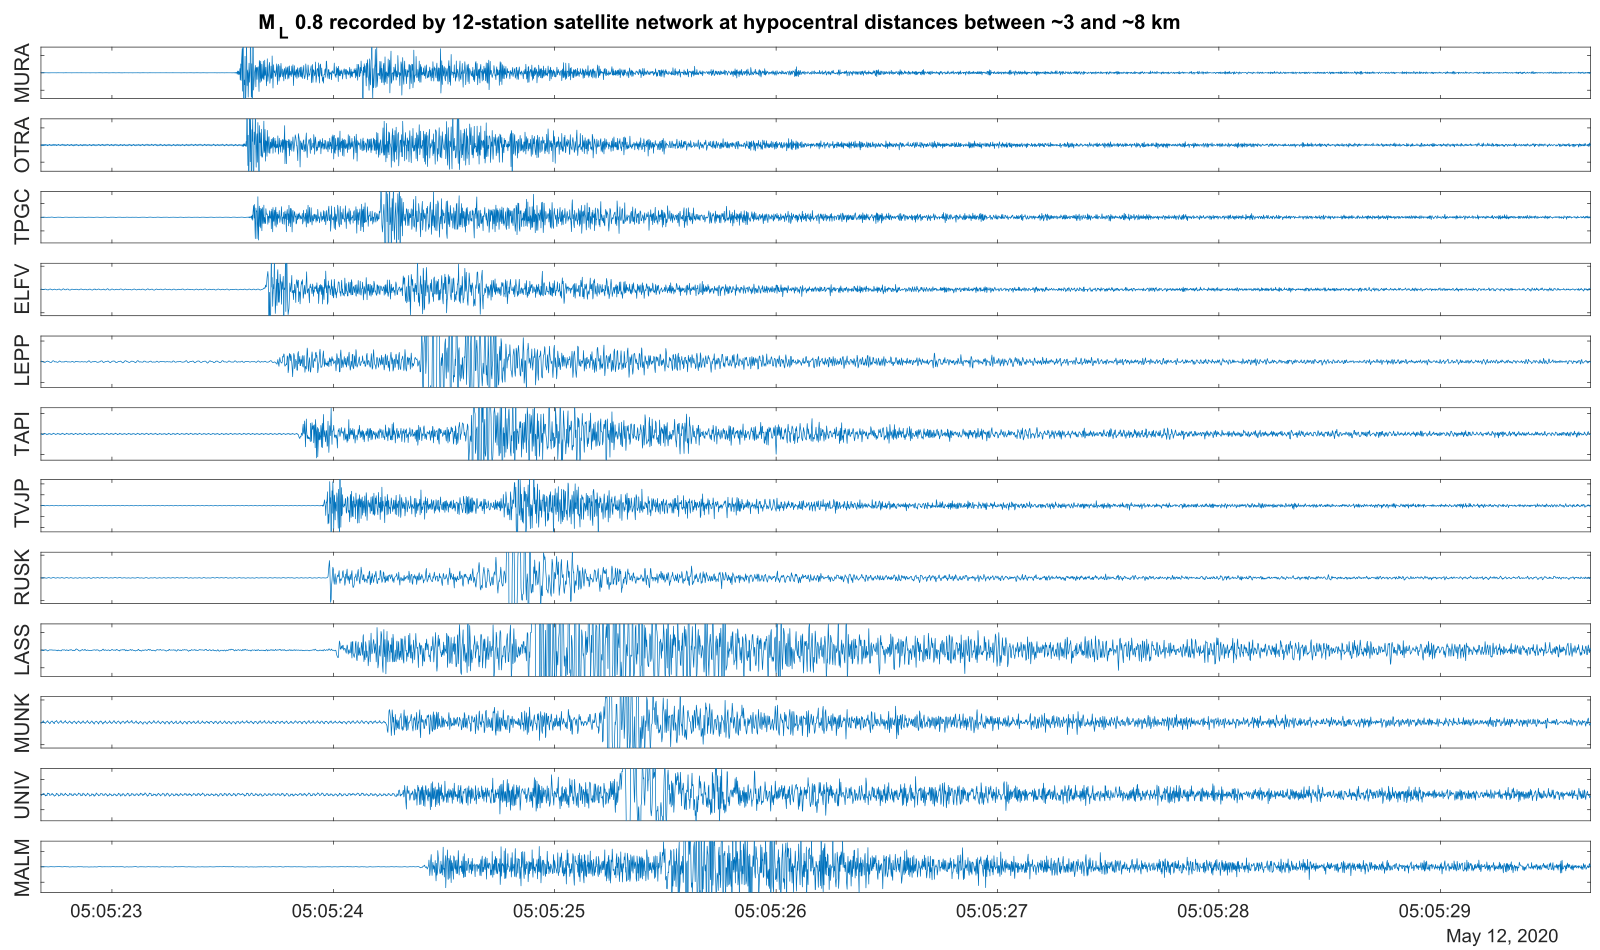 Small ML0.8 earthquake recorded by 12 seismic stations equipped with our AG4.5 sondes across Espoo and Helsinki